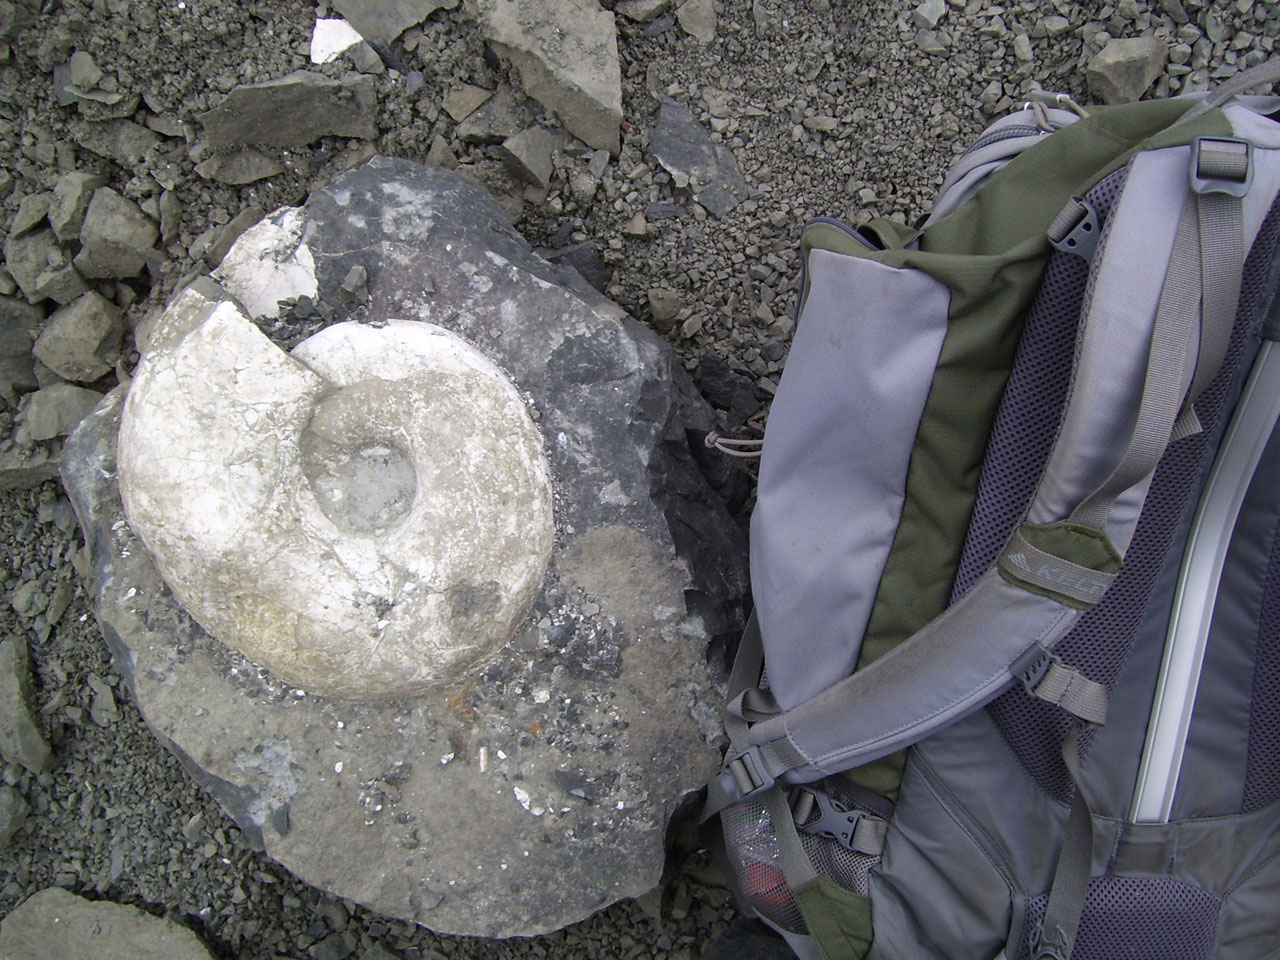 ammonite fossil backpack free photo